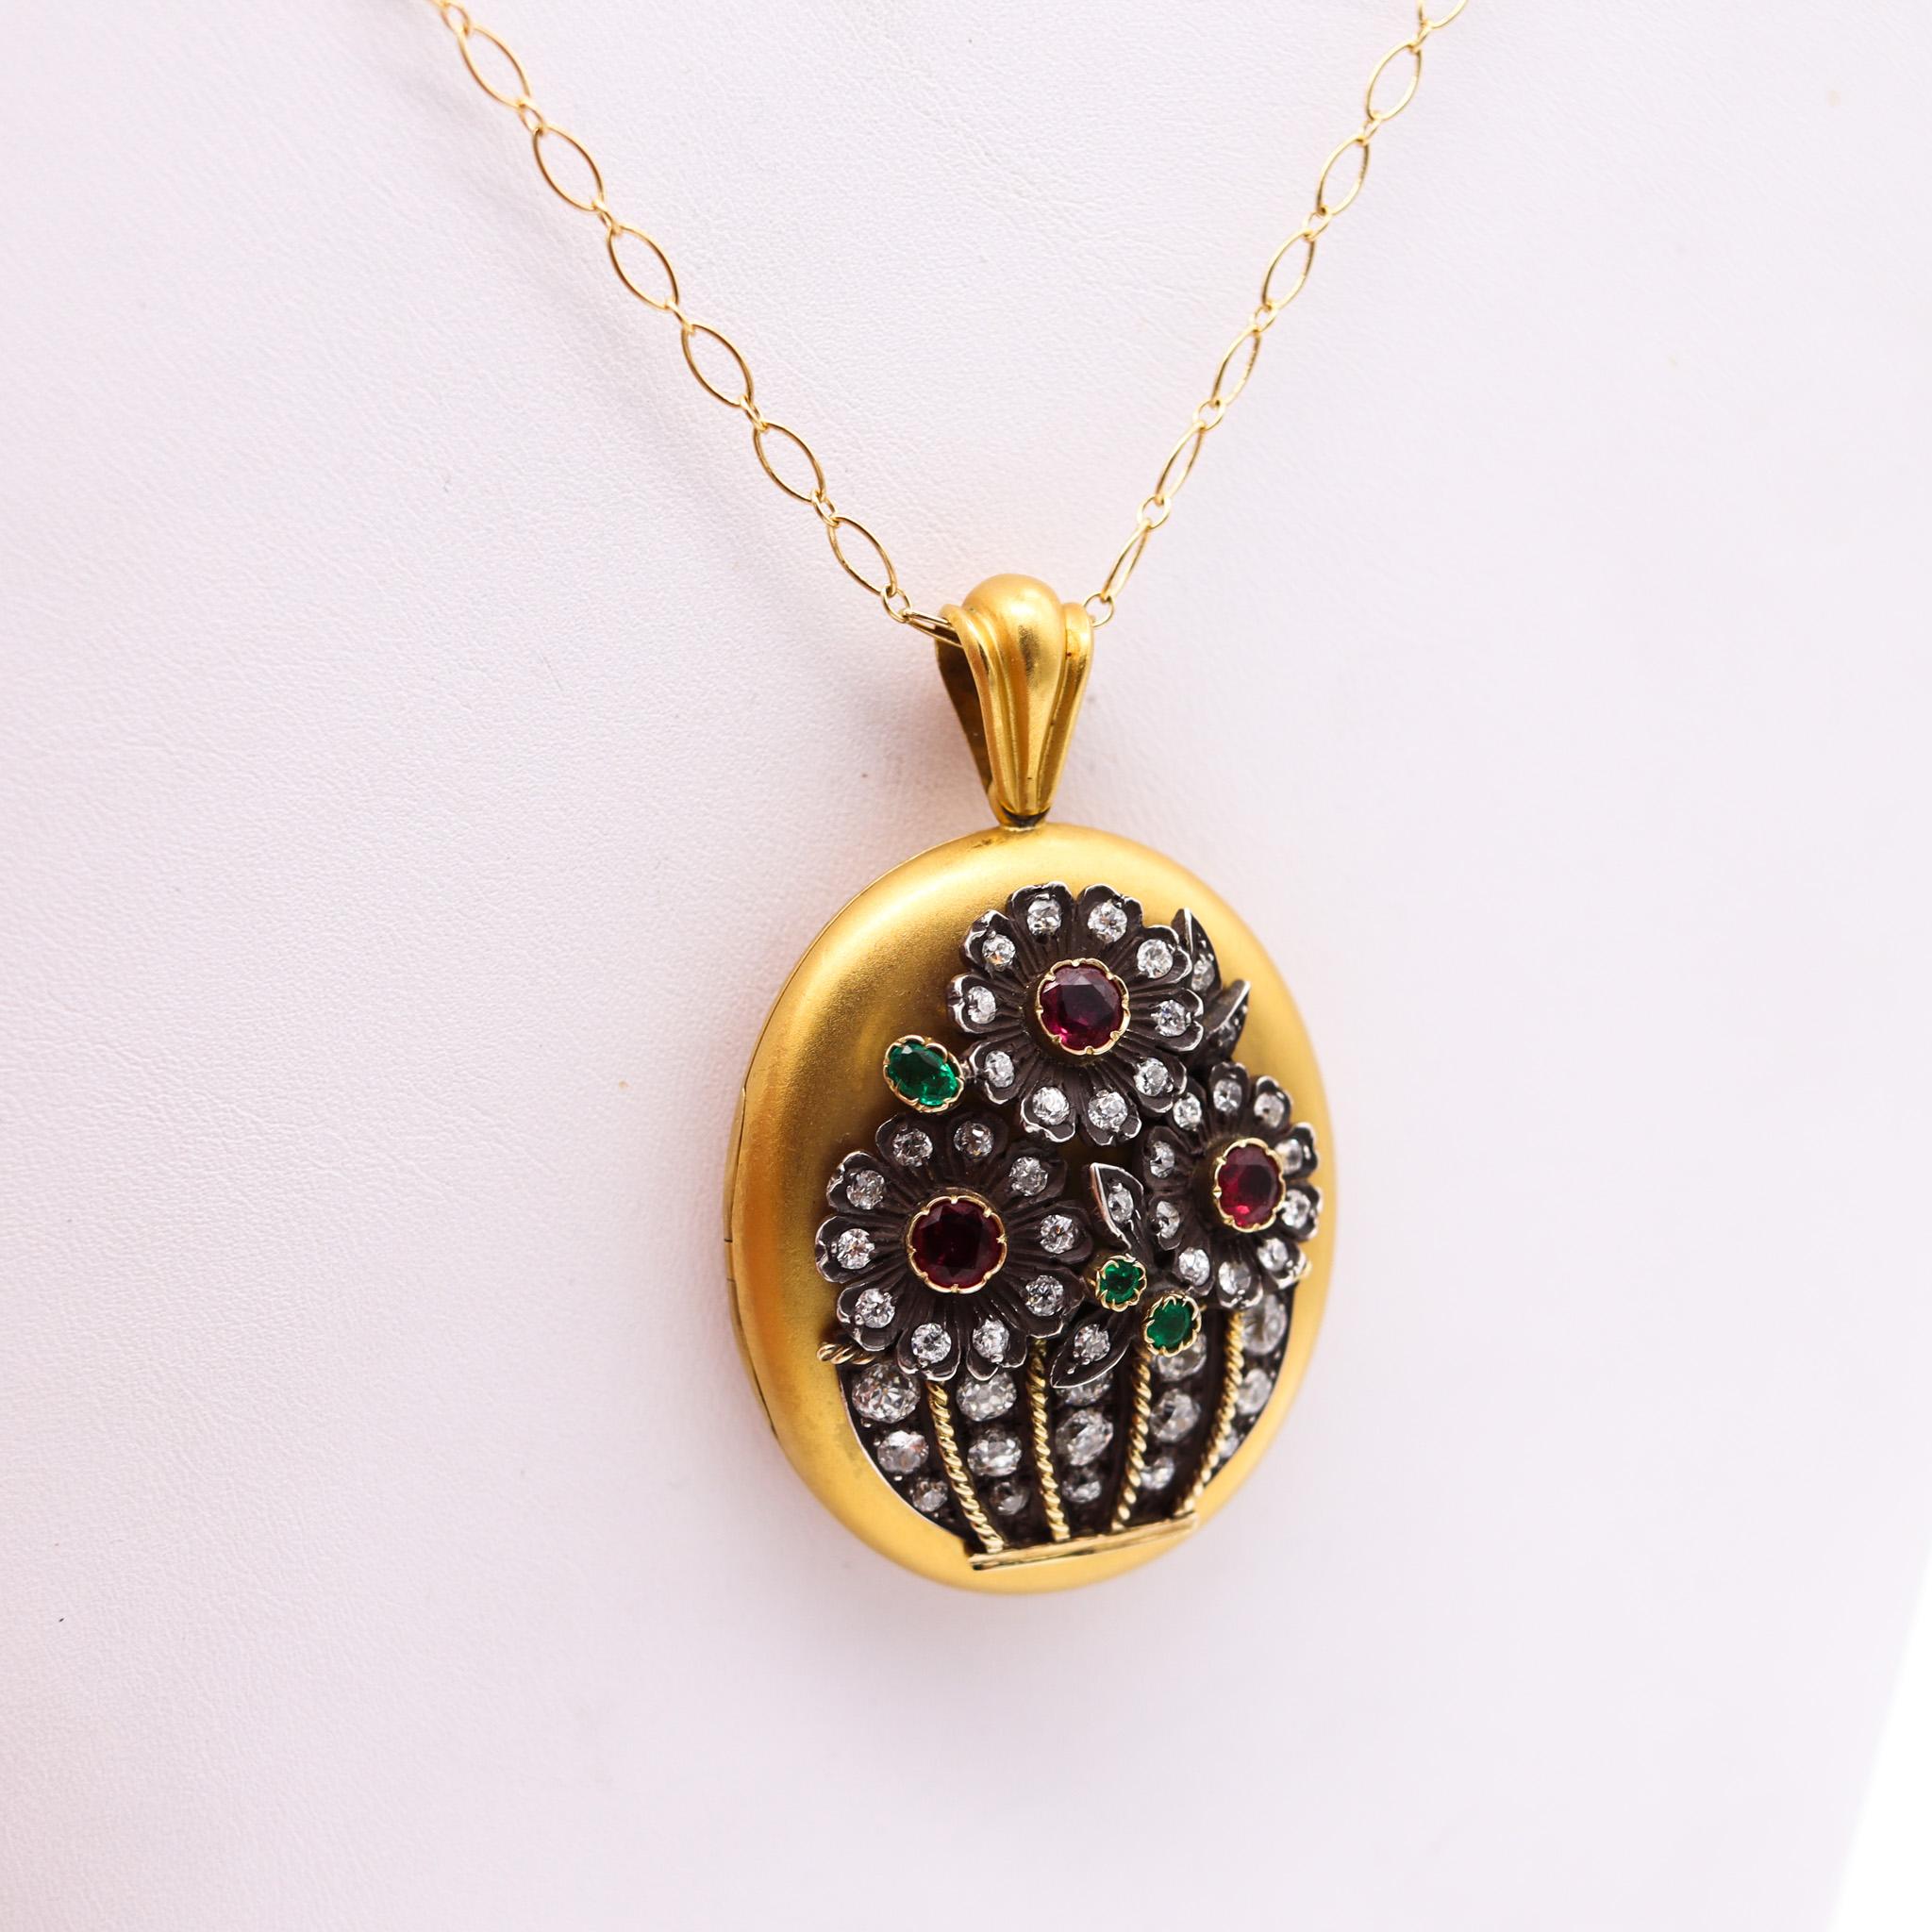 High Victorian Victorian 1890 Pendant Locket in 18kt Gold with 9.44ctw Diamonds Rubies Emerald For Sale